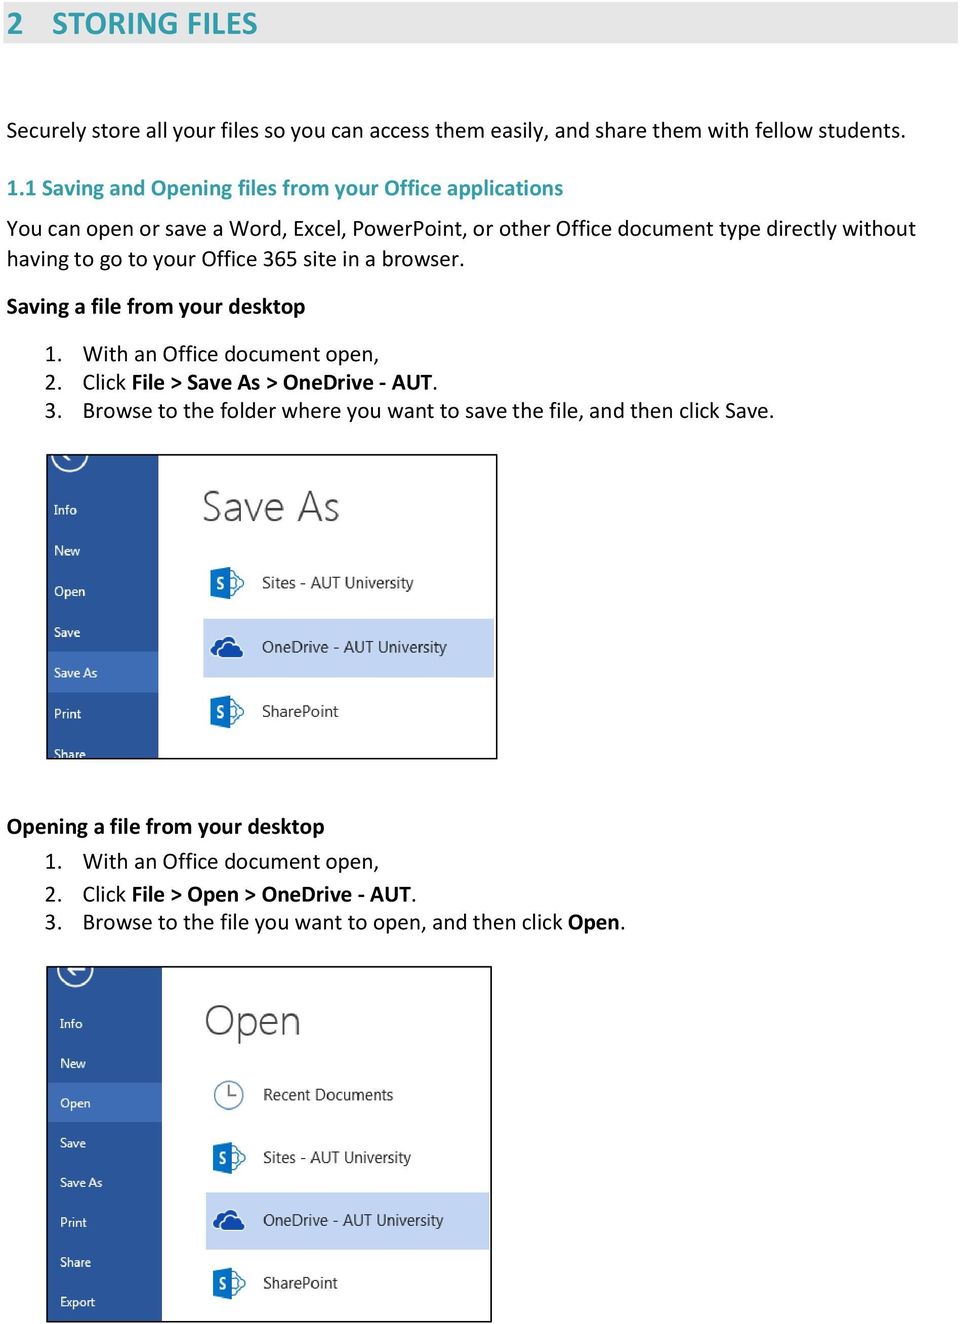 your Office 365 site in a browser. Saving a file from your desktop 1. With an Office document open, 2. Click File > Save As > OneDrive - AUT. 3. Browse to the folder where you want to save the file, and then click Save.